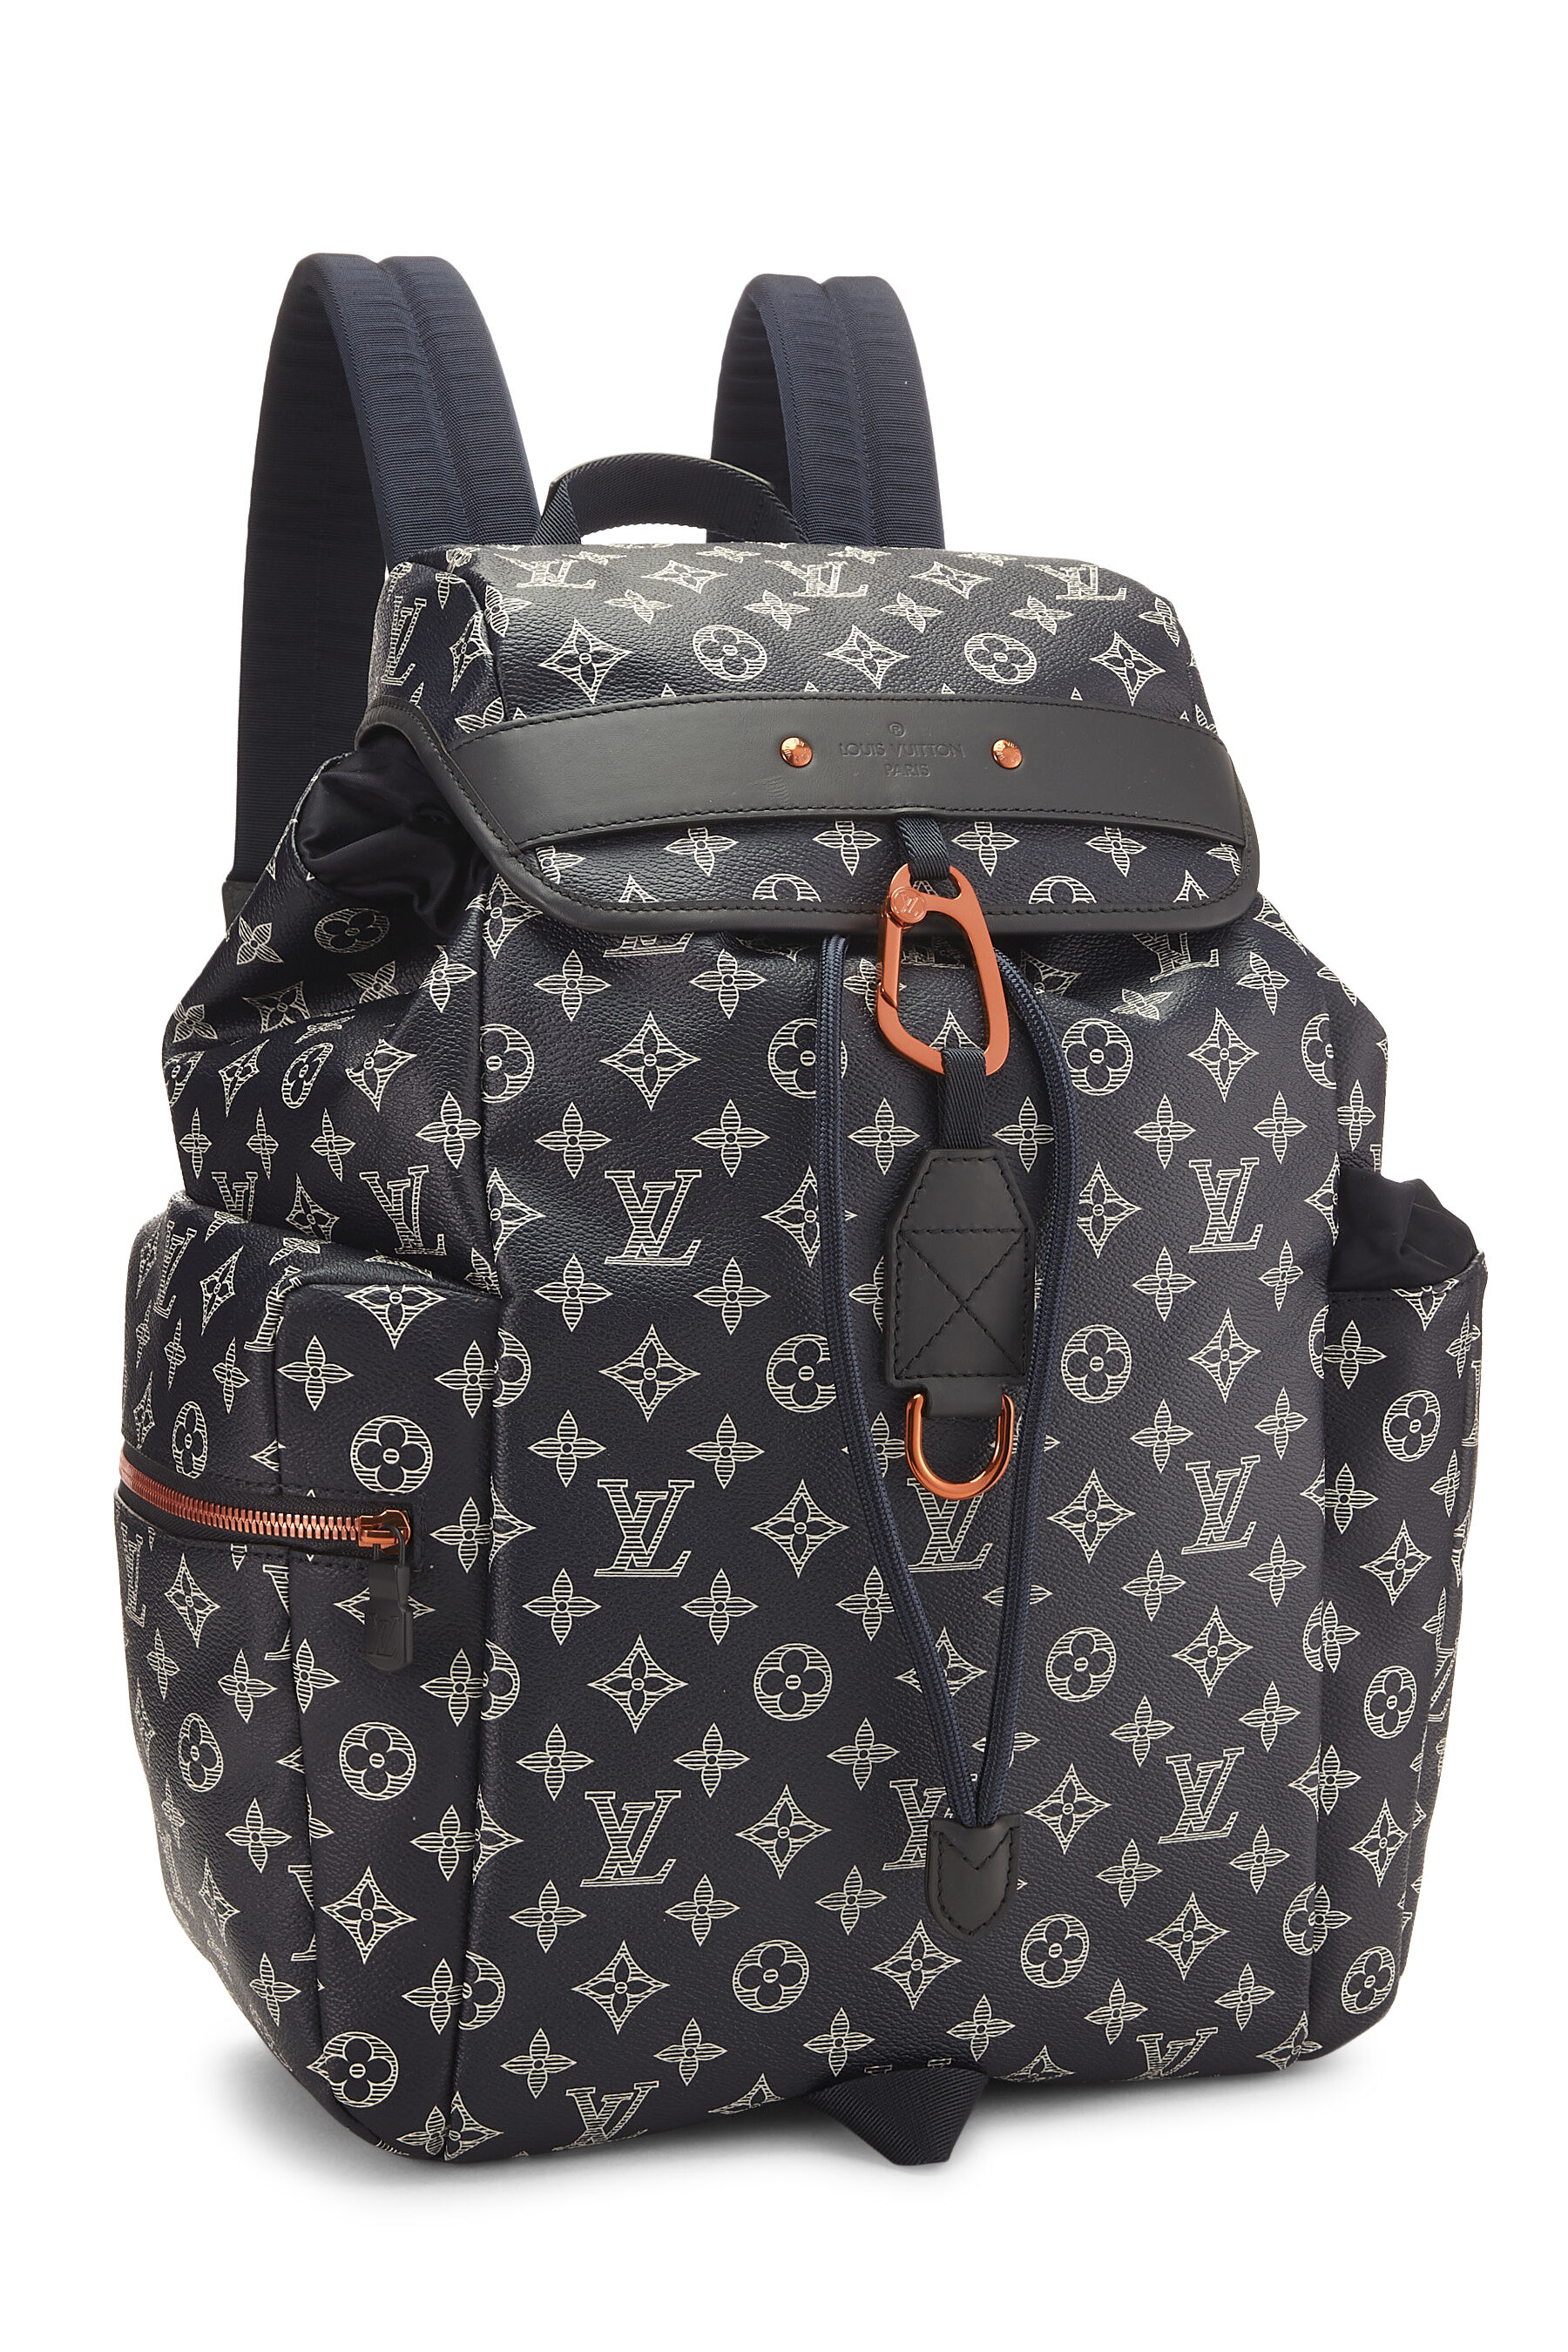 vuitton backpack real